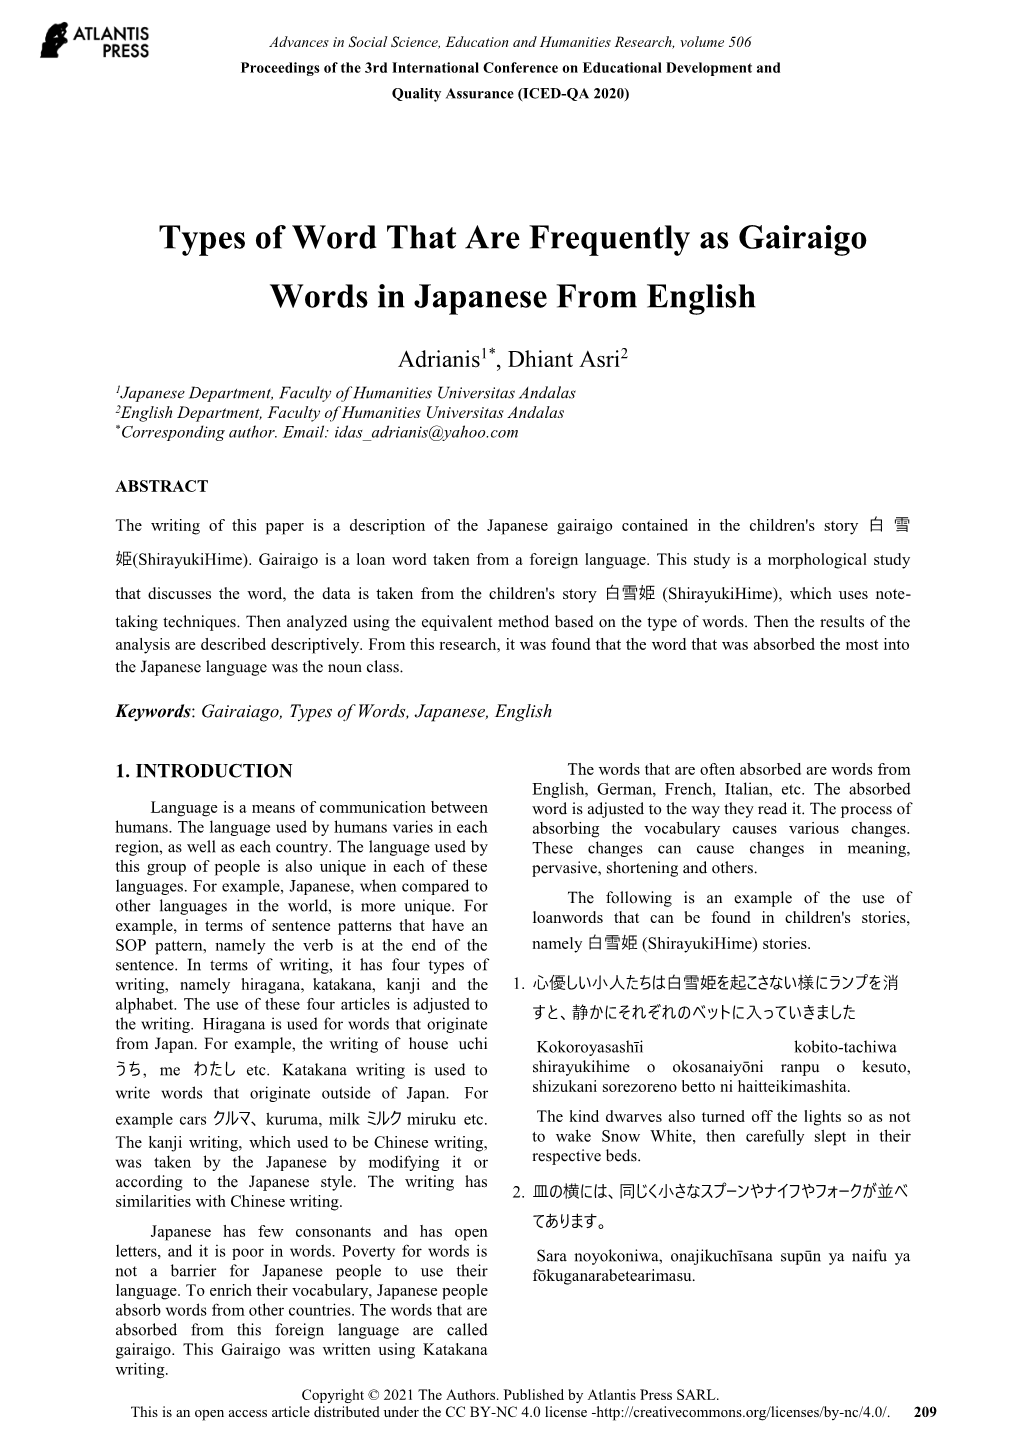 Types of Word That Are Frequently As Gairaigo Words in Japanese from English